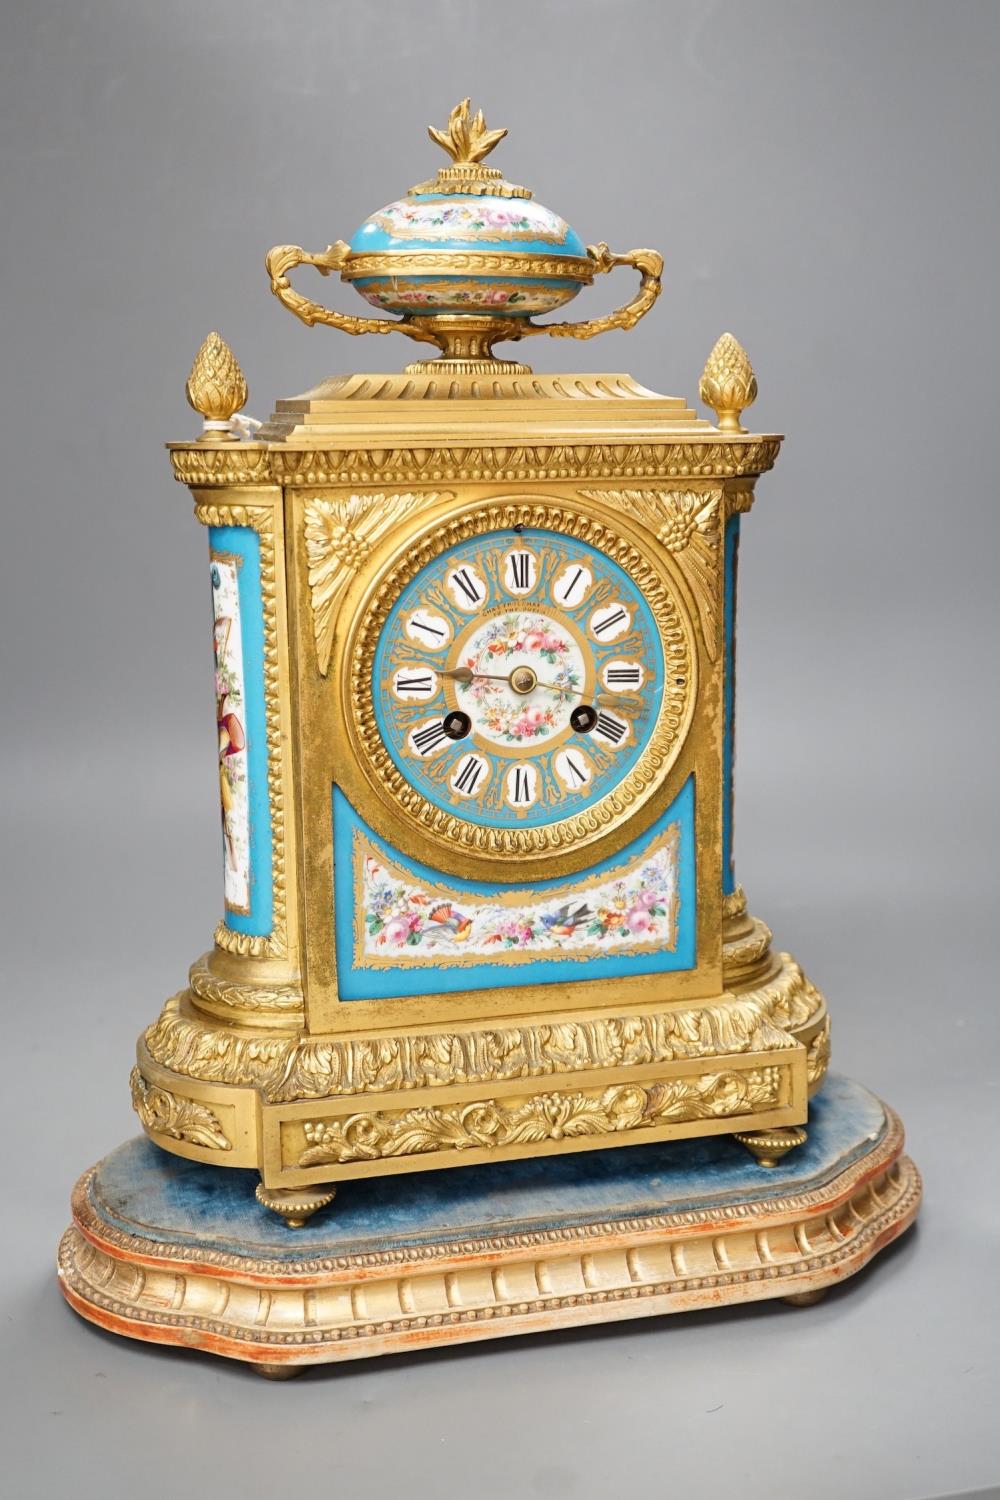 A French ormolu mantel clock, with inset floral decorated porcelain plaques and dial, 40cms high